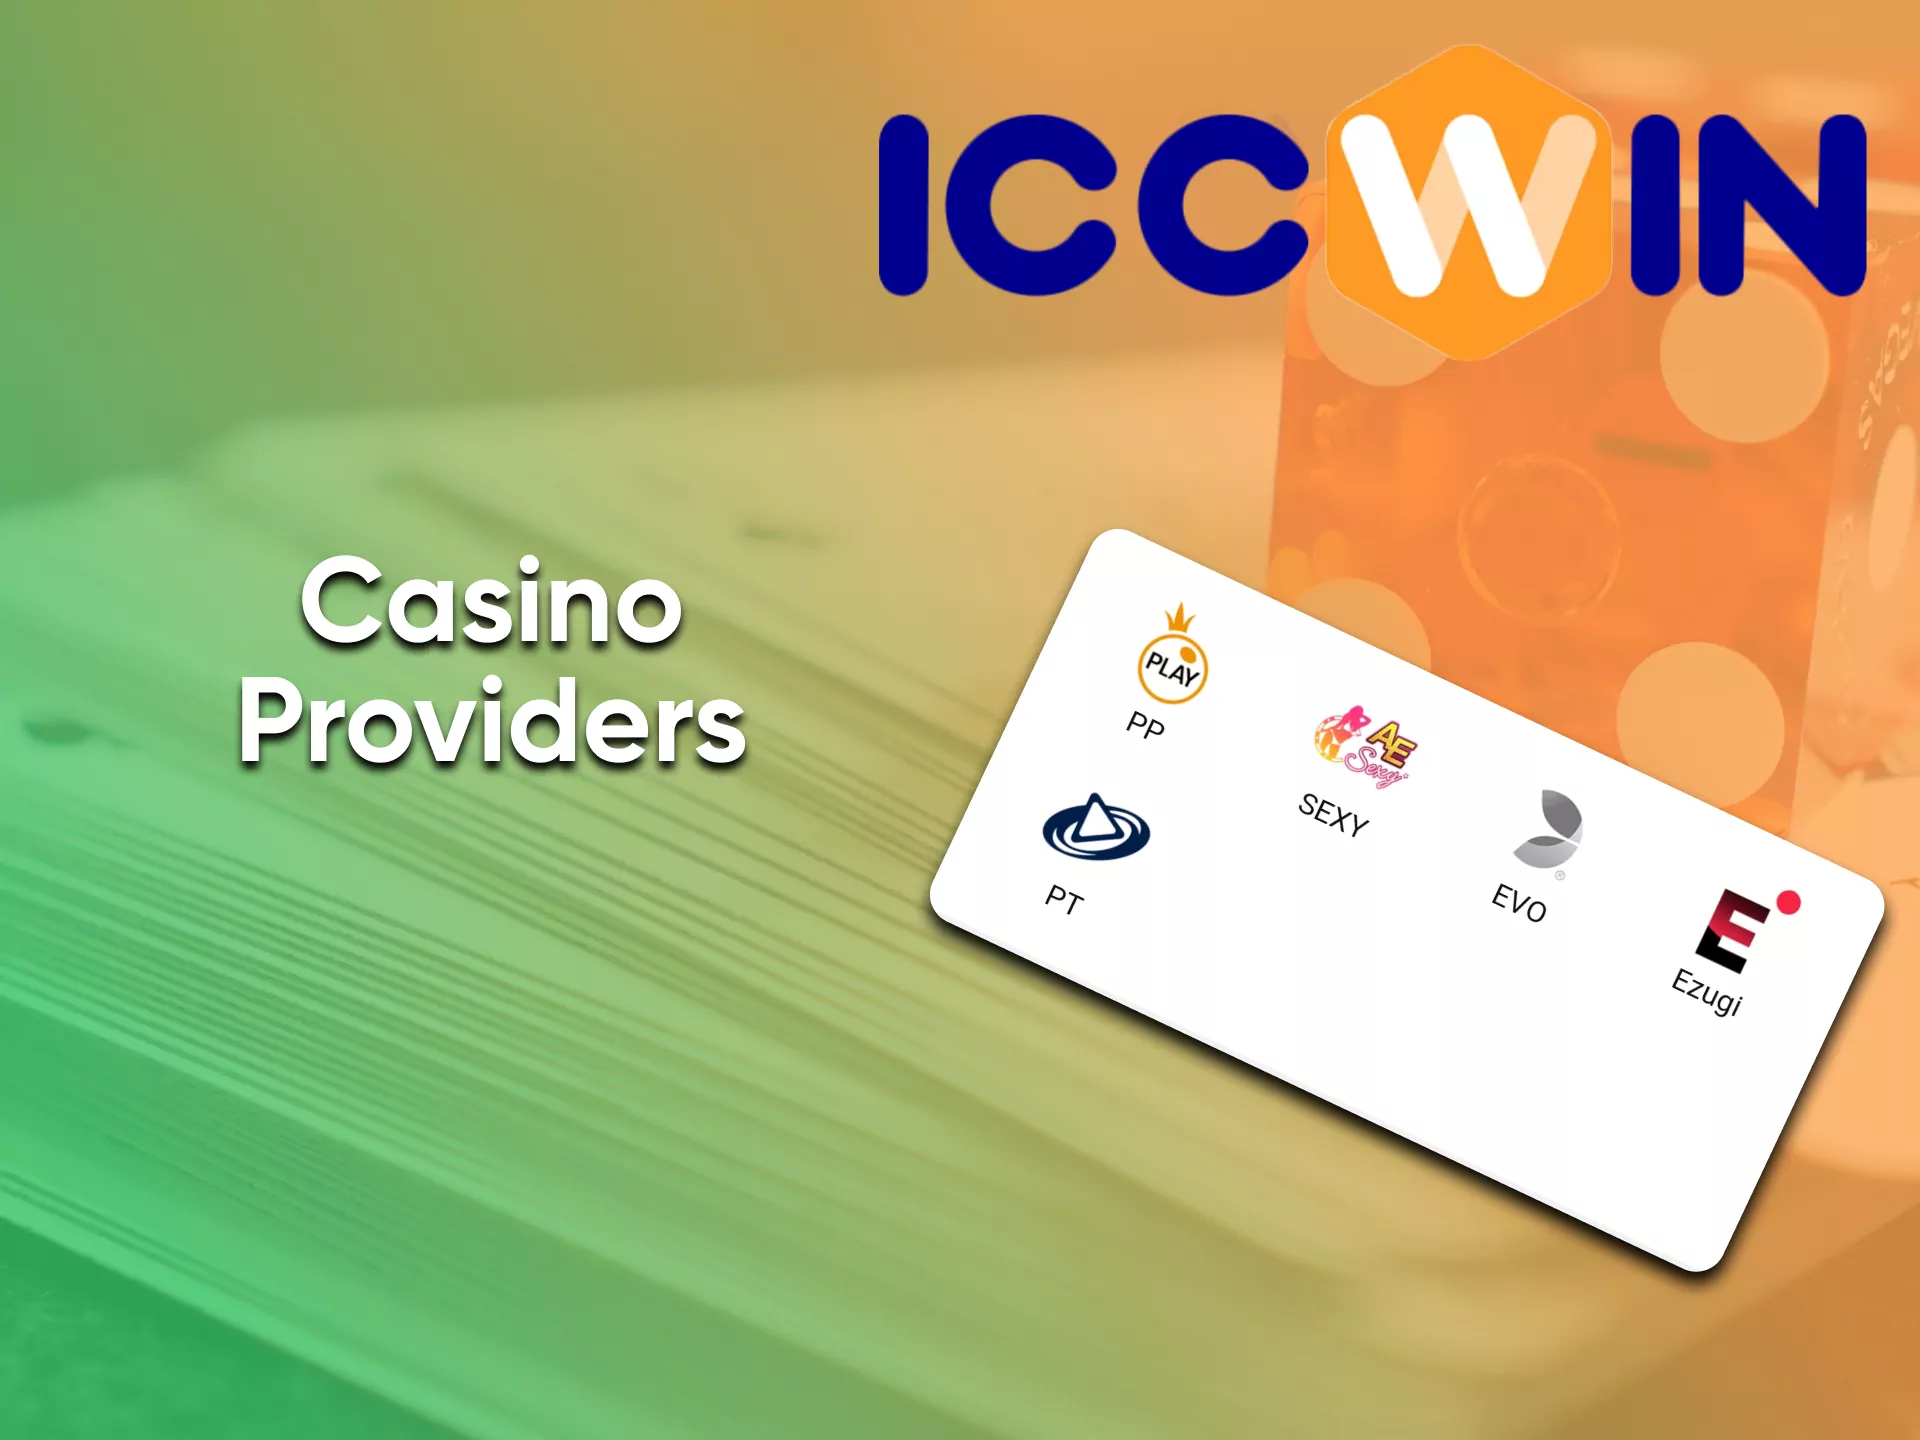 At the ICCWin casino, games are only from trusted sources.